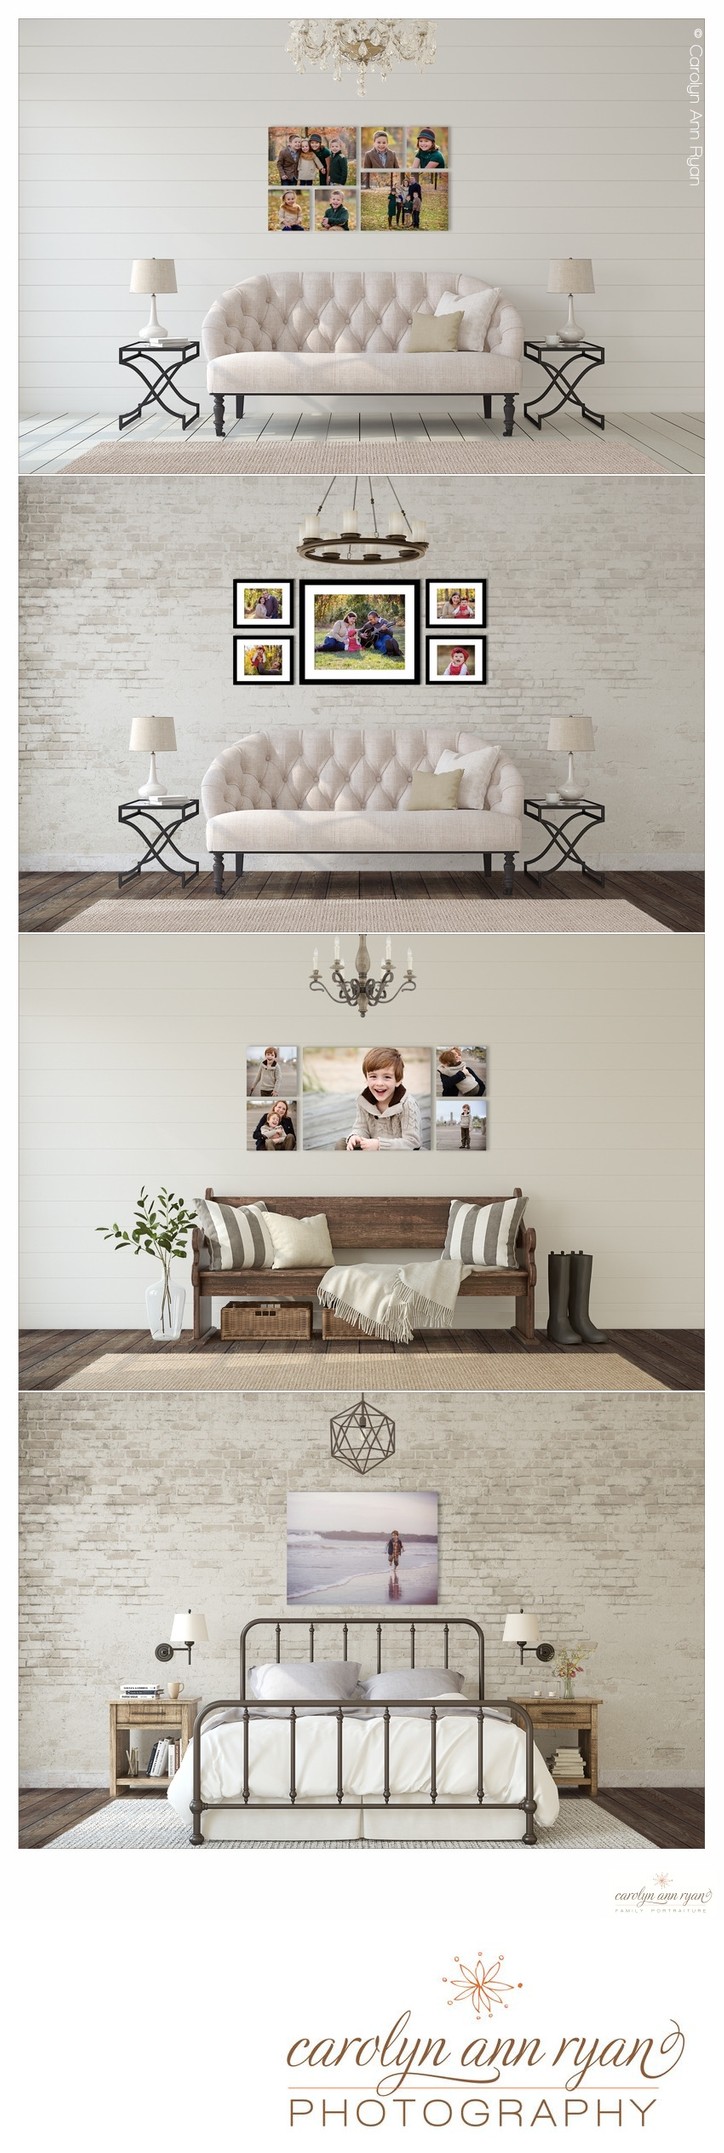 Wall Display Ideas for Family Portraits Charlotte 